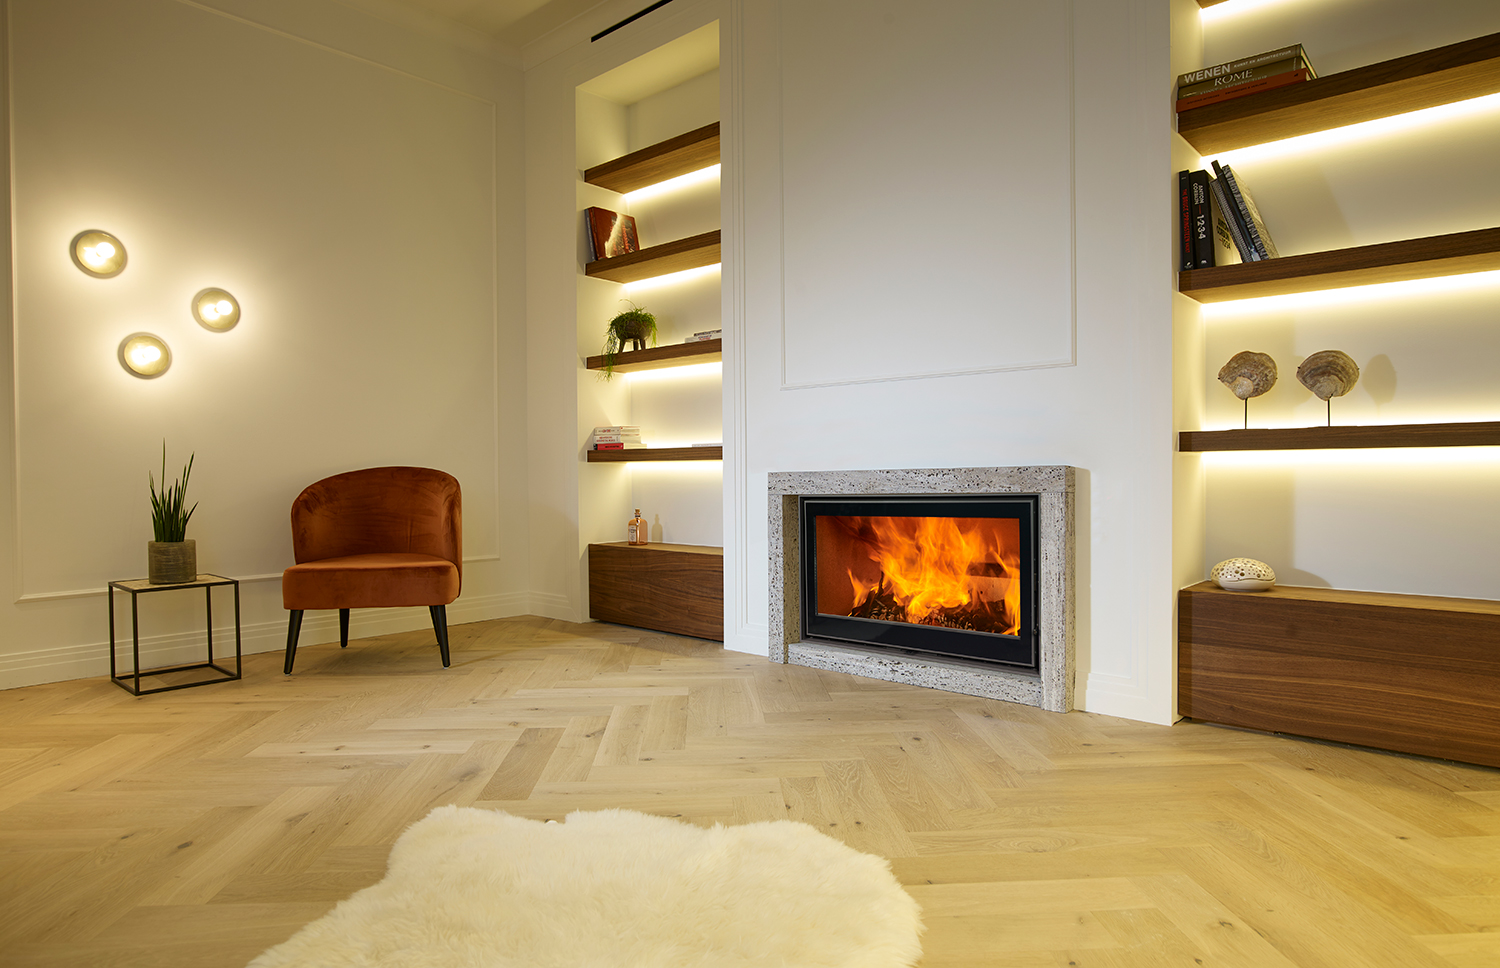 Image Why choose a wood burning fire place?